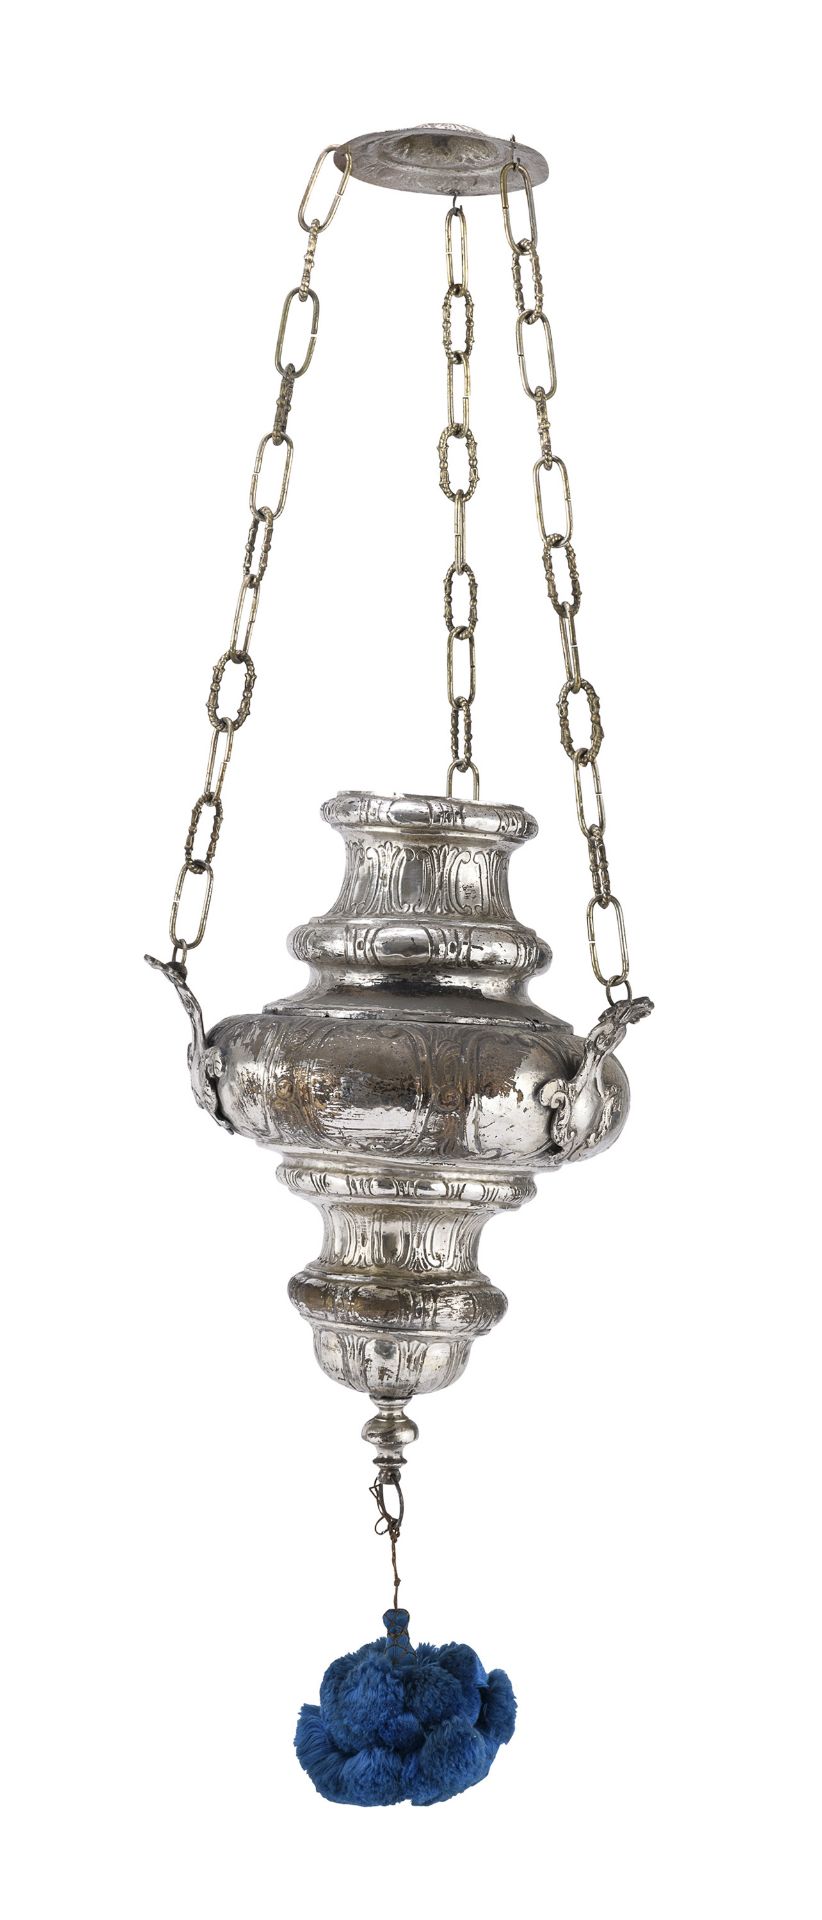 SILVER-PLATED HANGING CENSER 18TH CENTURY